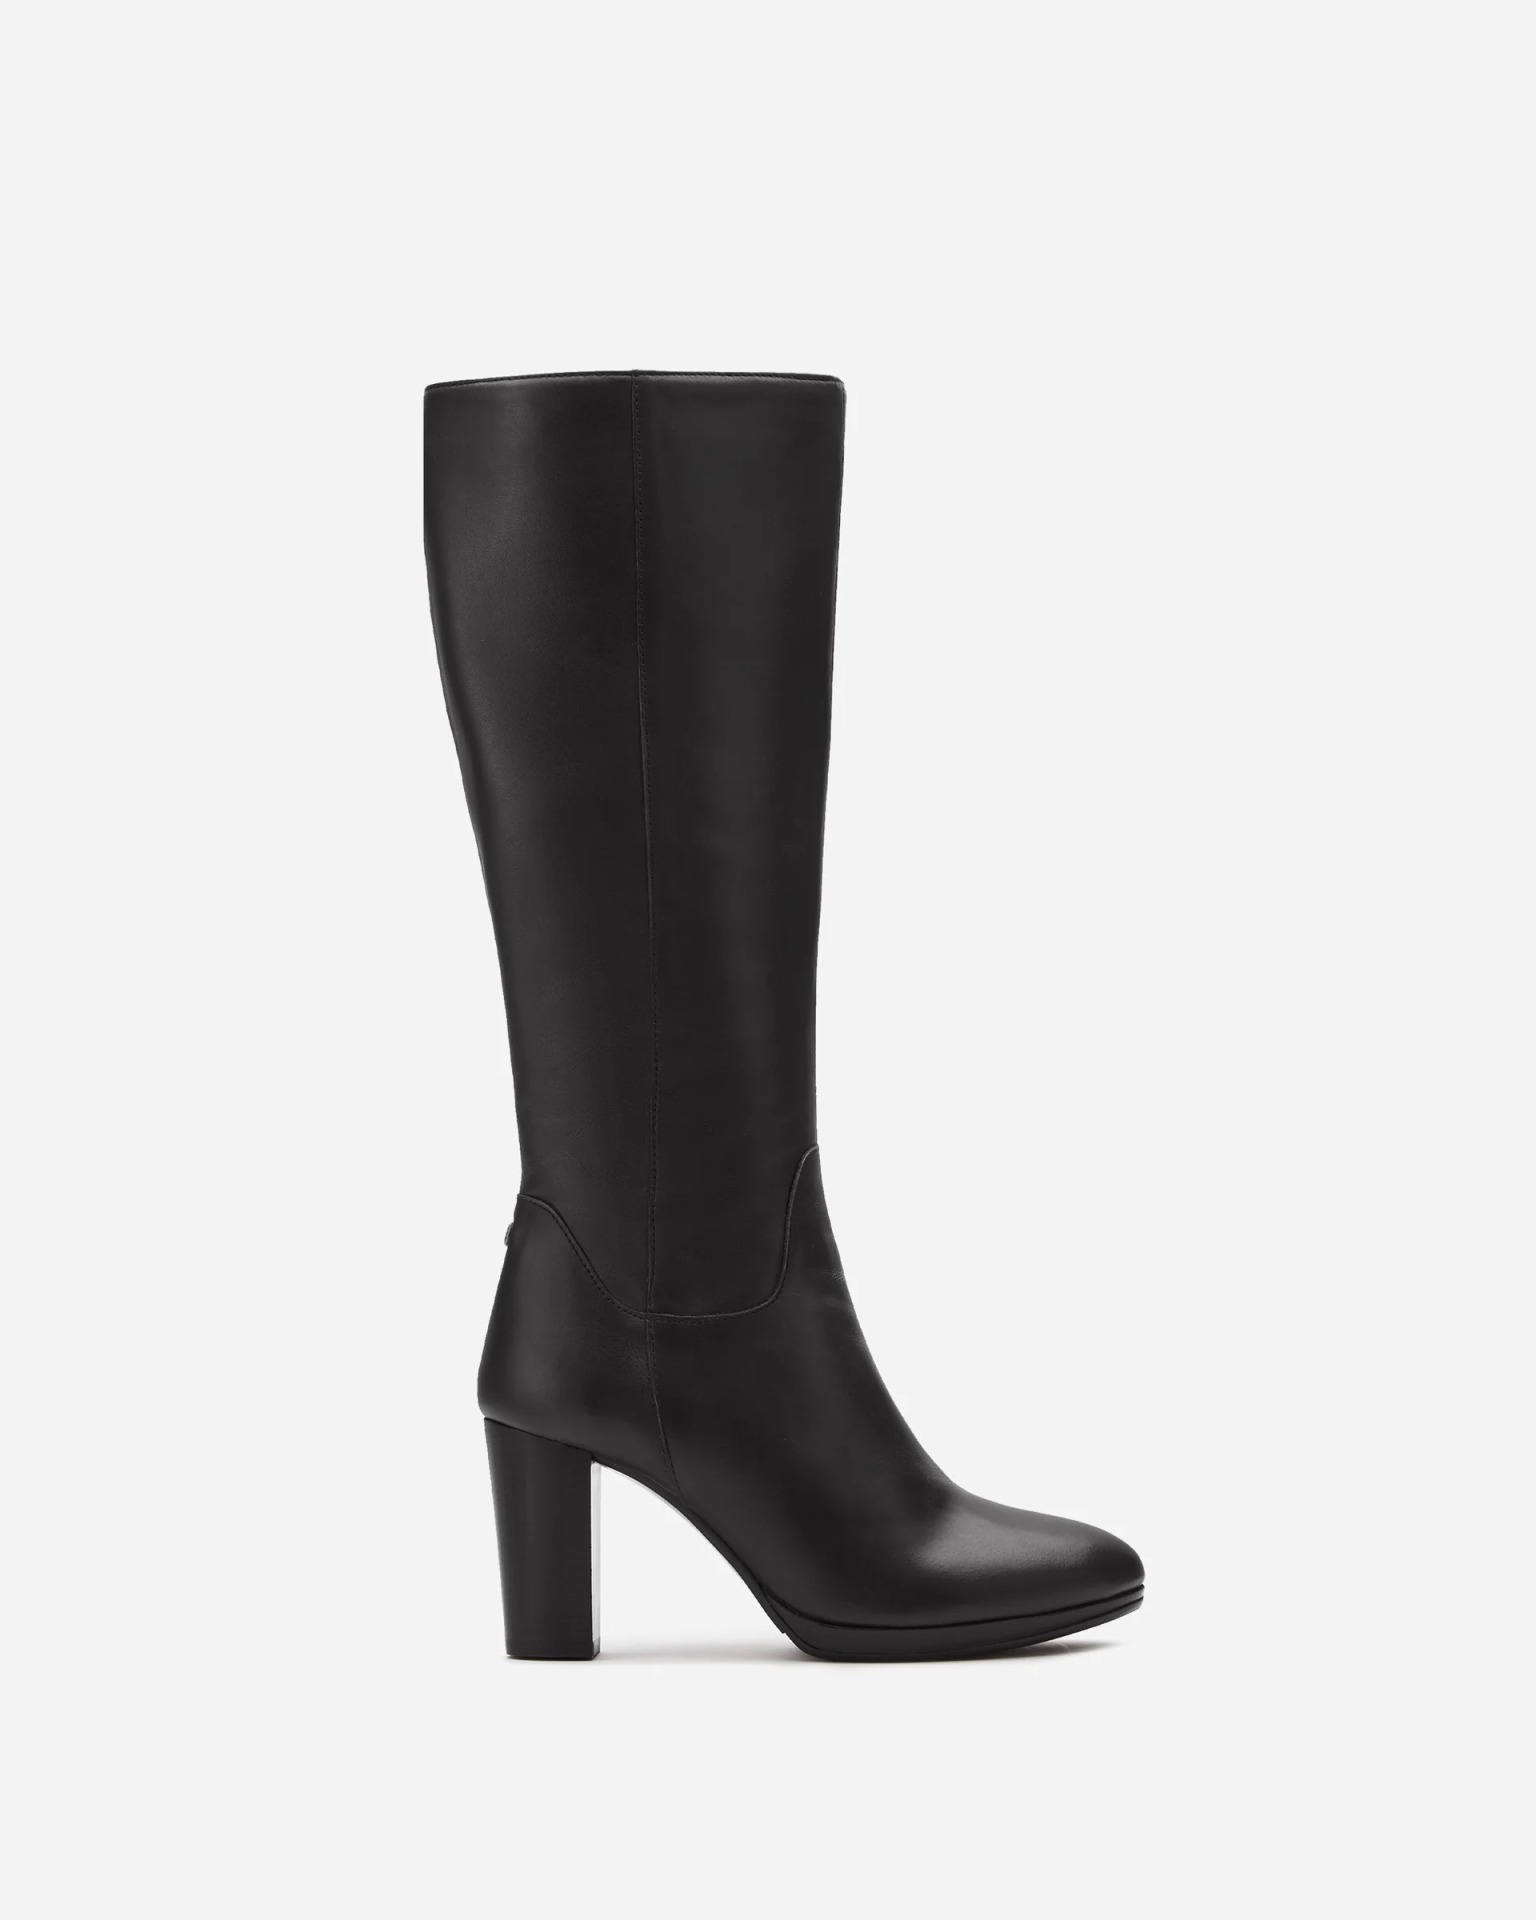 Belmore Knee High Boots in Black Leather